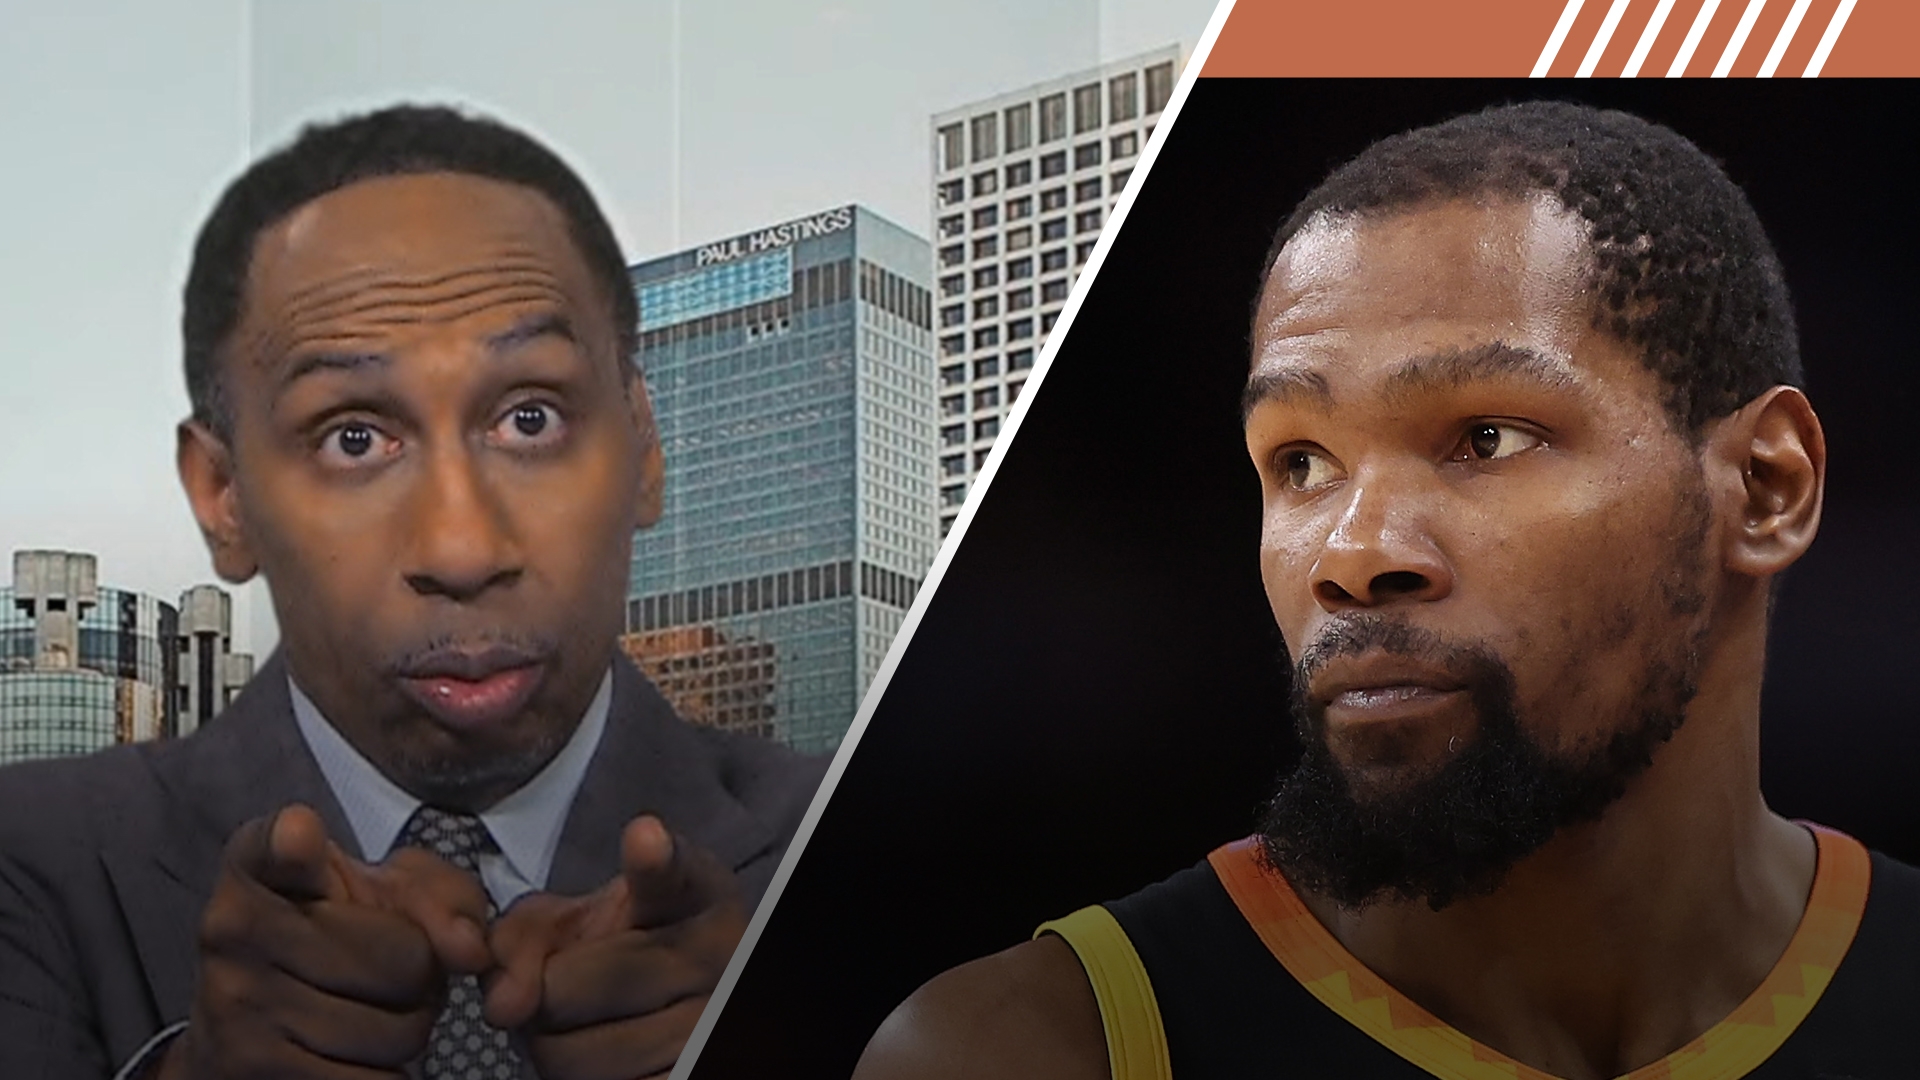 Stephen A. takes exception to Suns GM on comments about KD